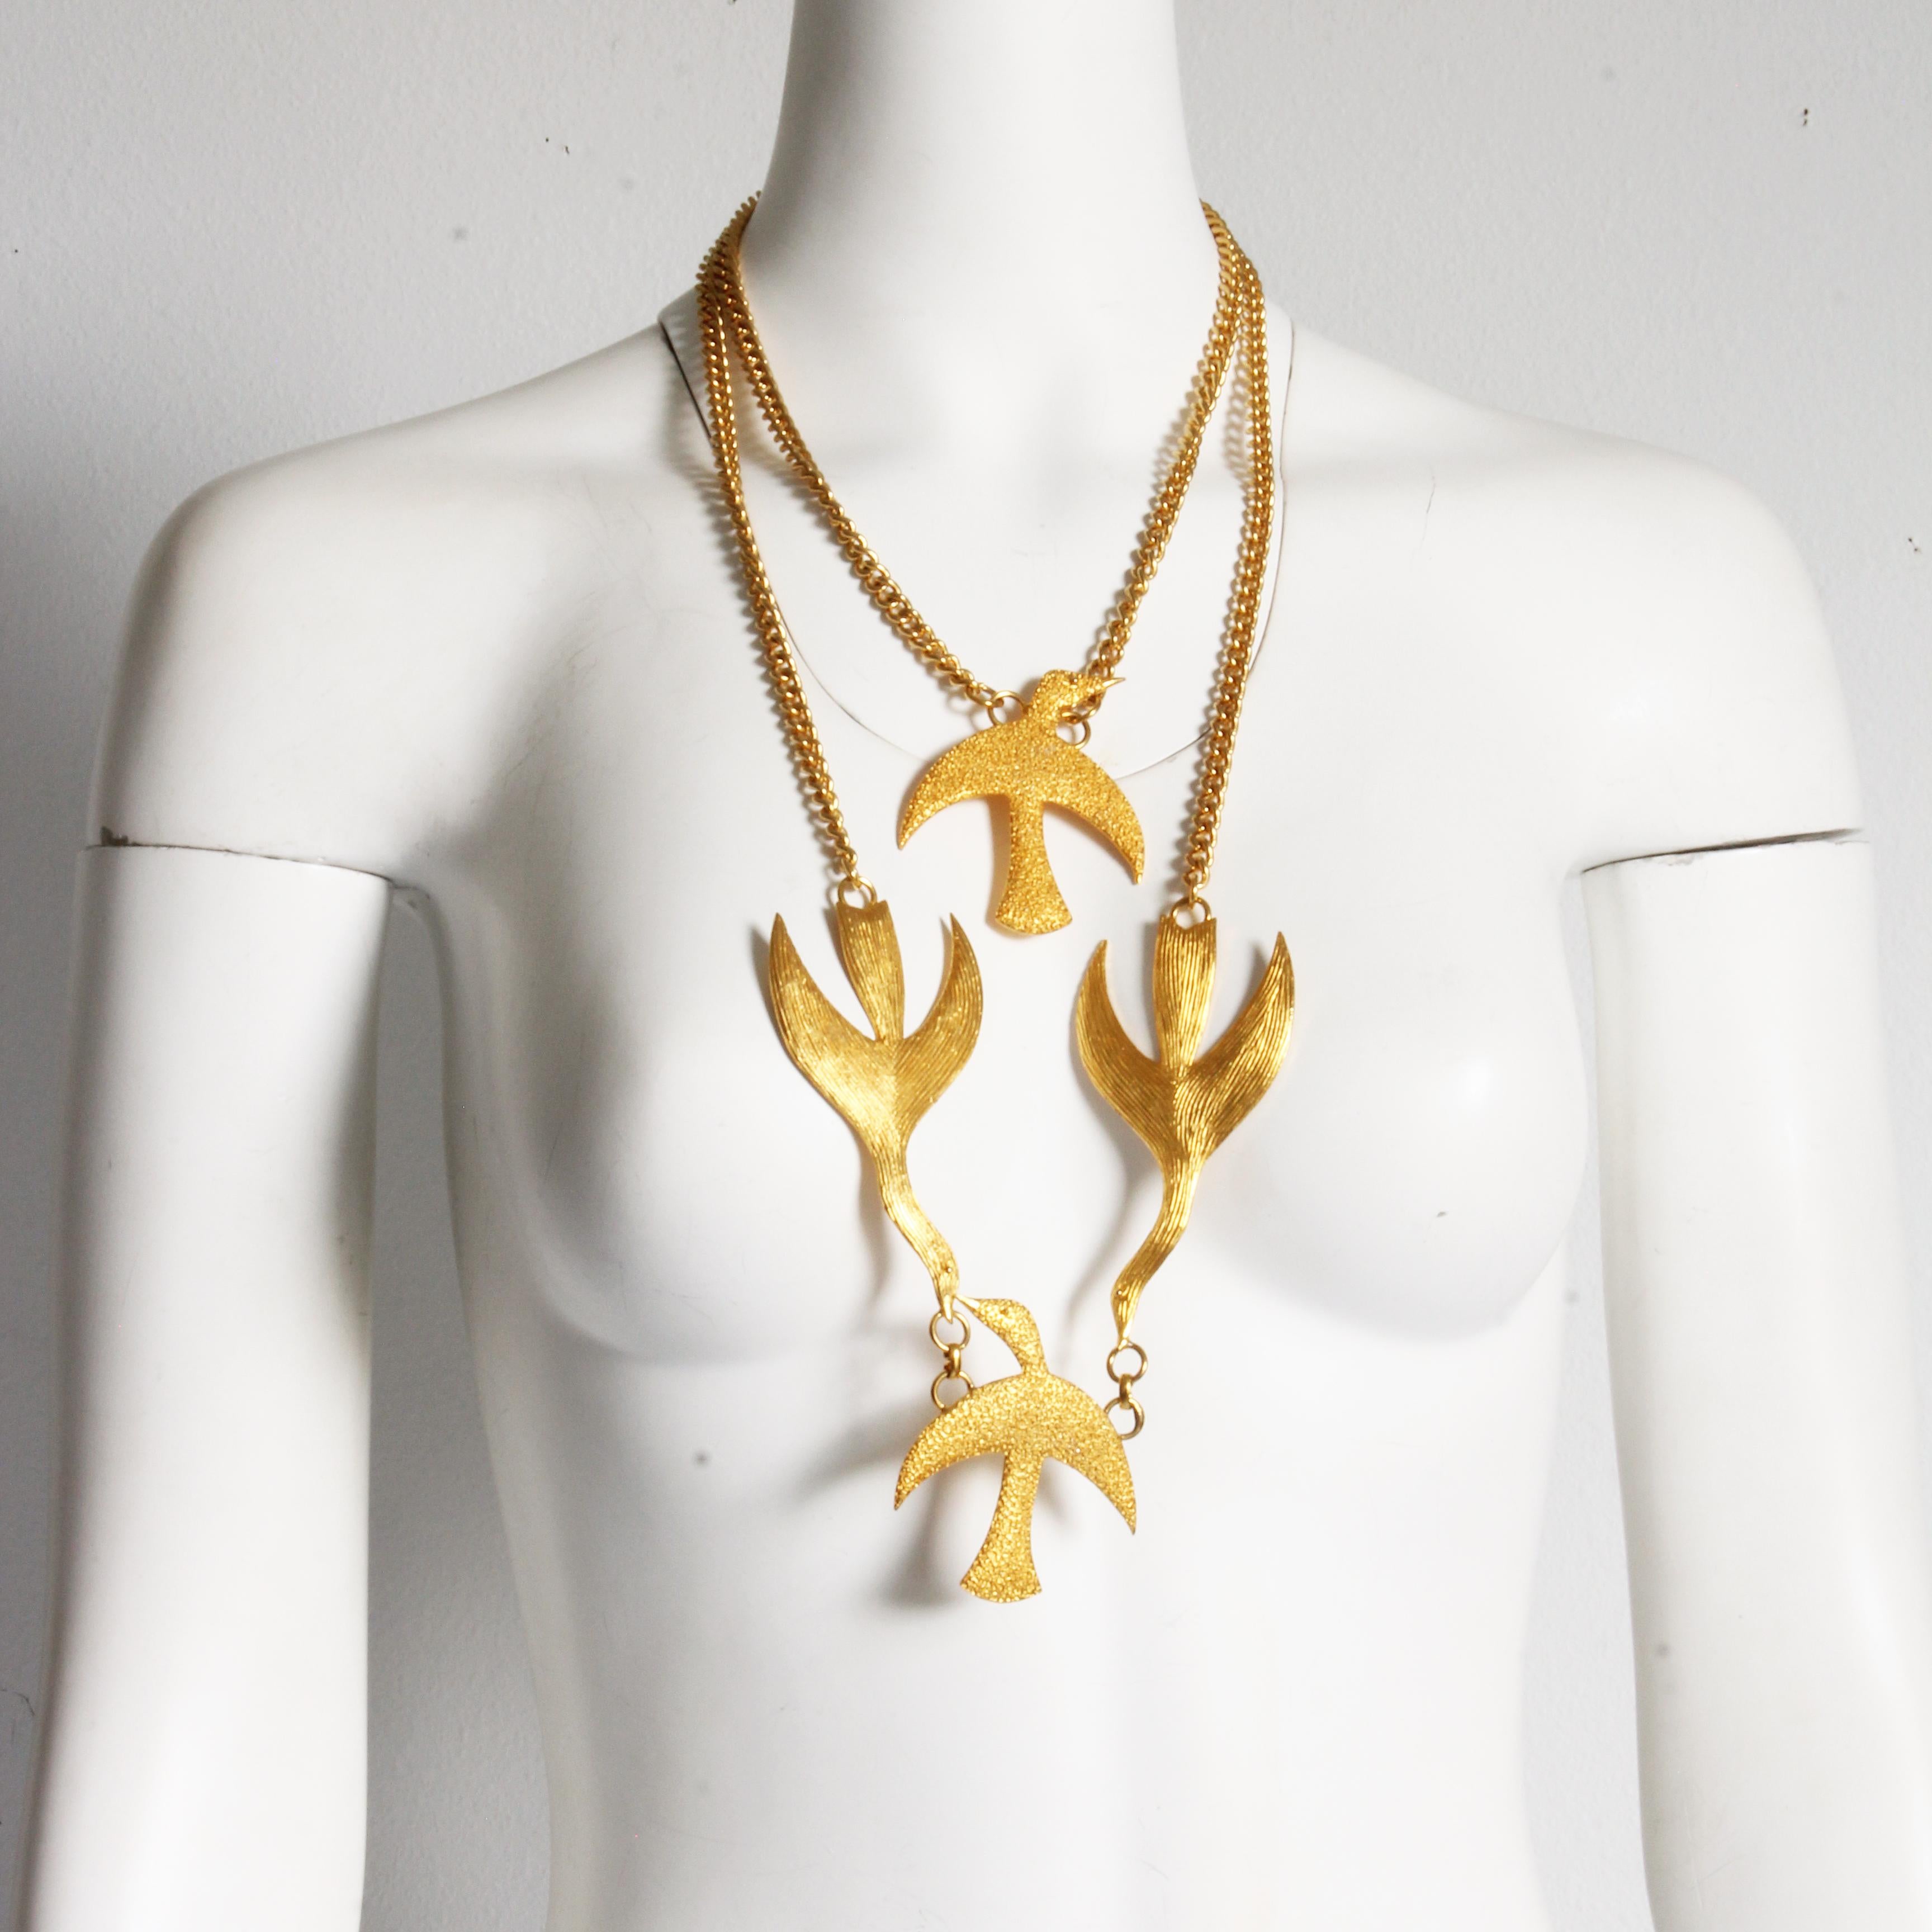 Yves Saint Laurent Necklace Birds Oversized Multi-Chain Georges Braque Vintage In Good Condition For Sale In Port Saint Lucie, FL